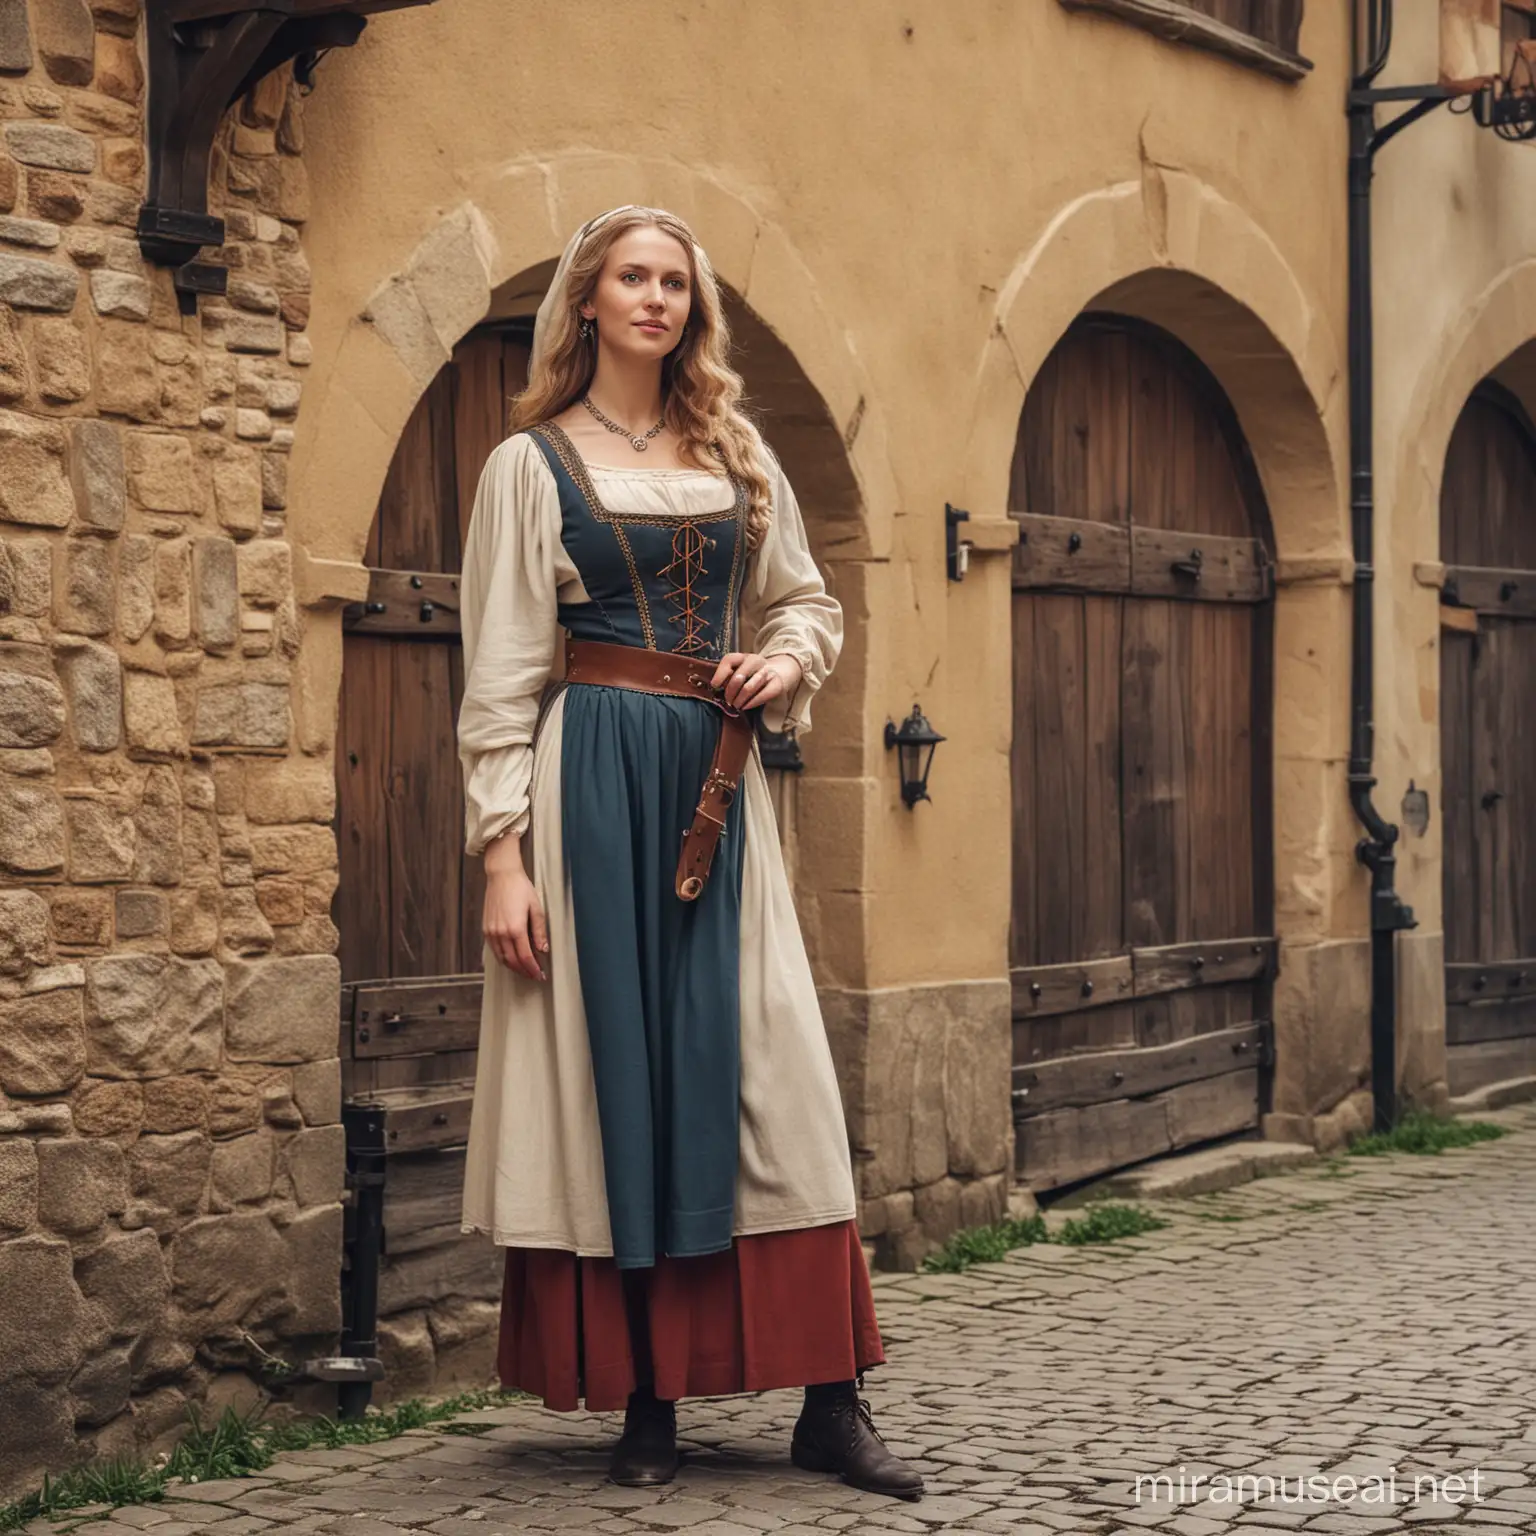 Medieval Minnesinger Singing with Lute in Castle Courtyard